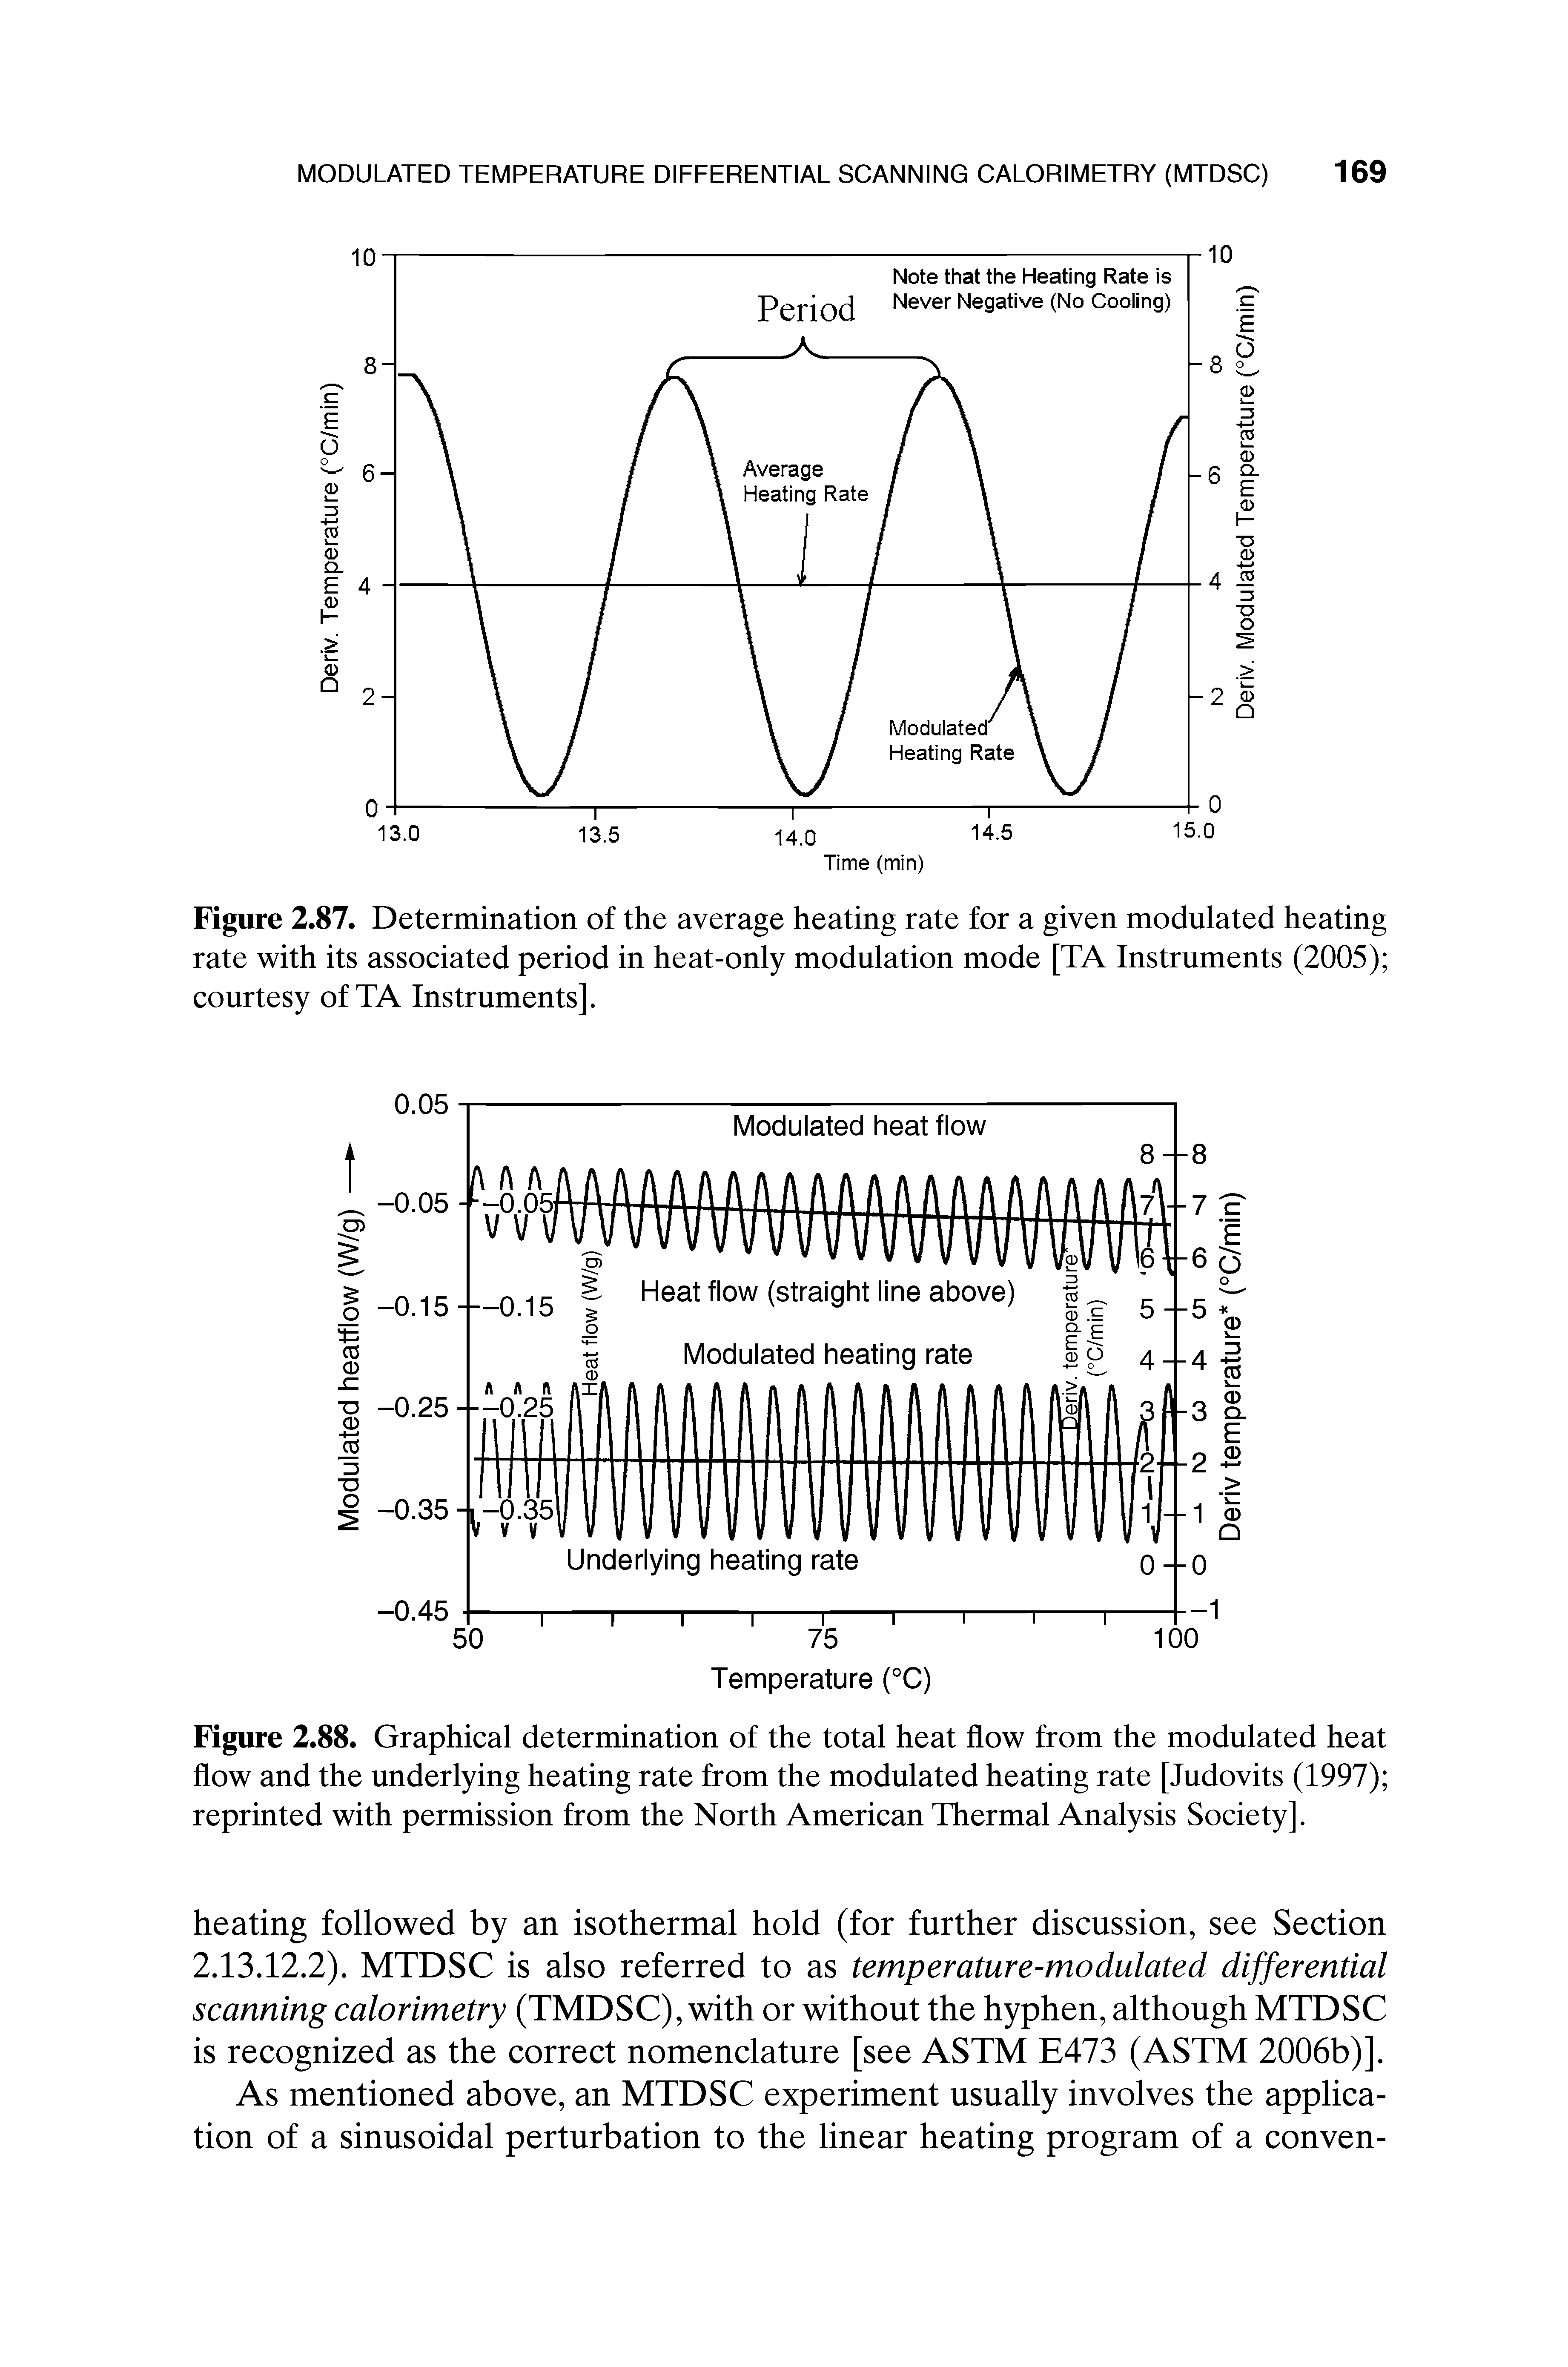 Figure 2.88. Graphical determination of the total heat flow from the modulated heat flow and the underlying heating rate from the modulated heating rate [Judovits (1997) reprinted with permission from the North American Thermal Analysis Society].